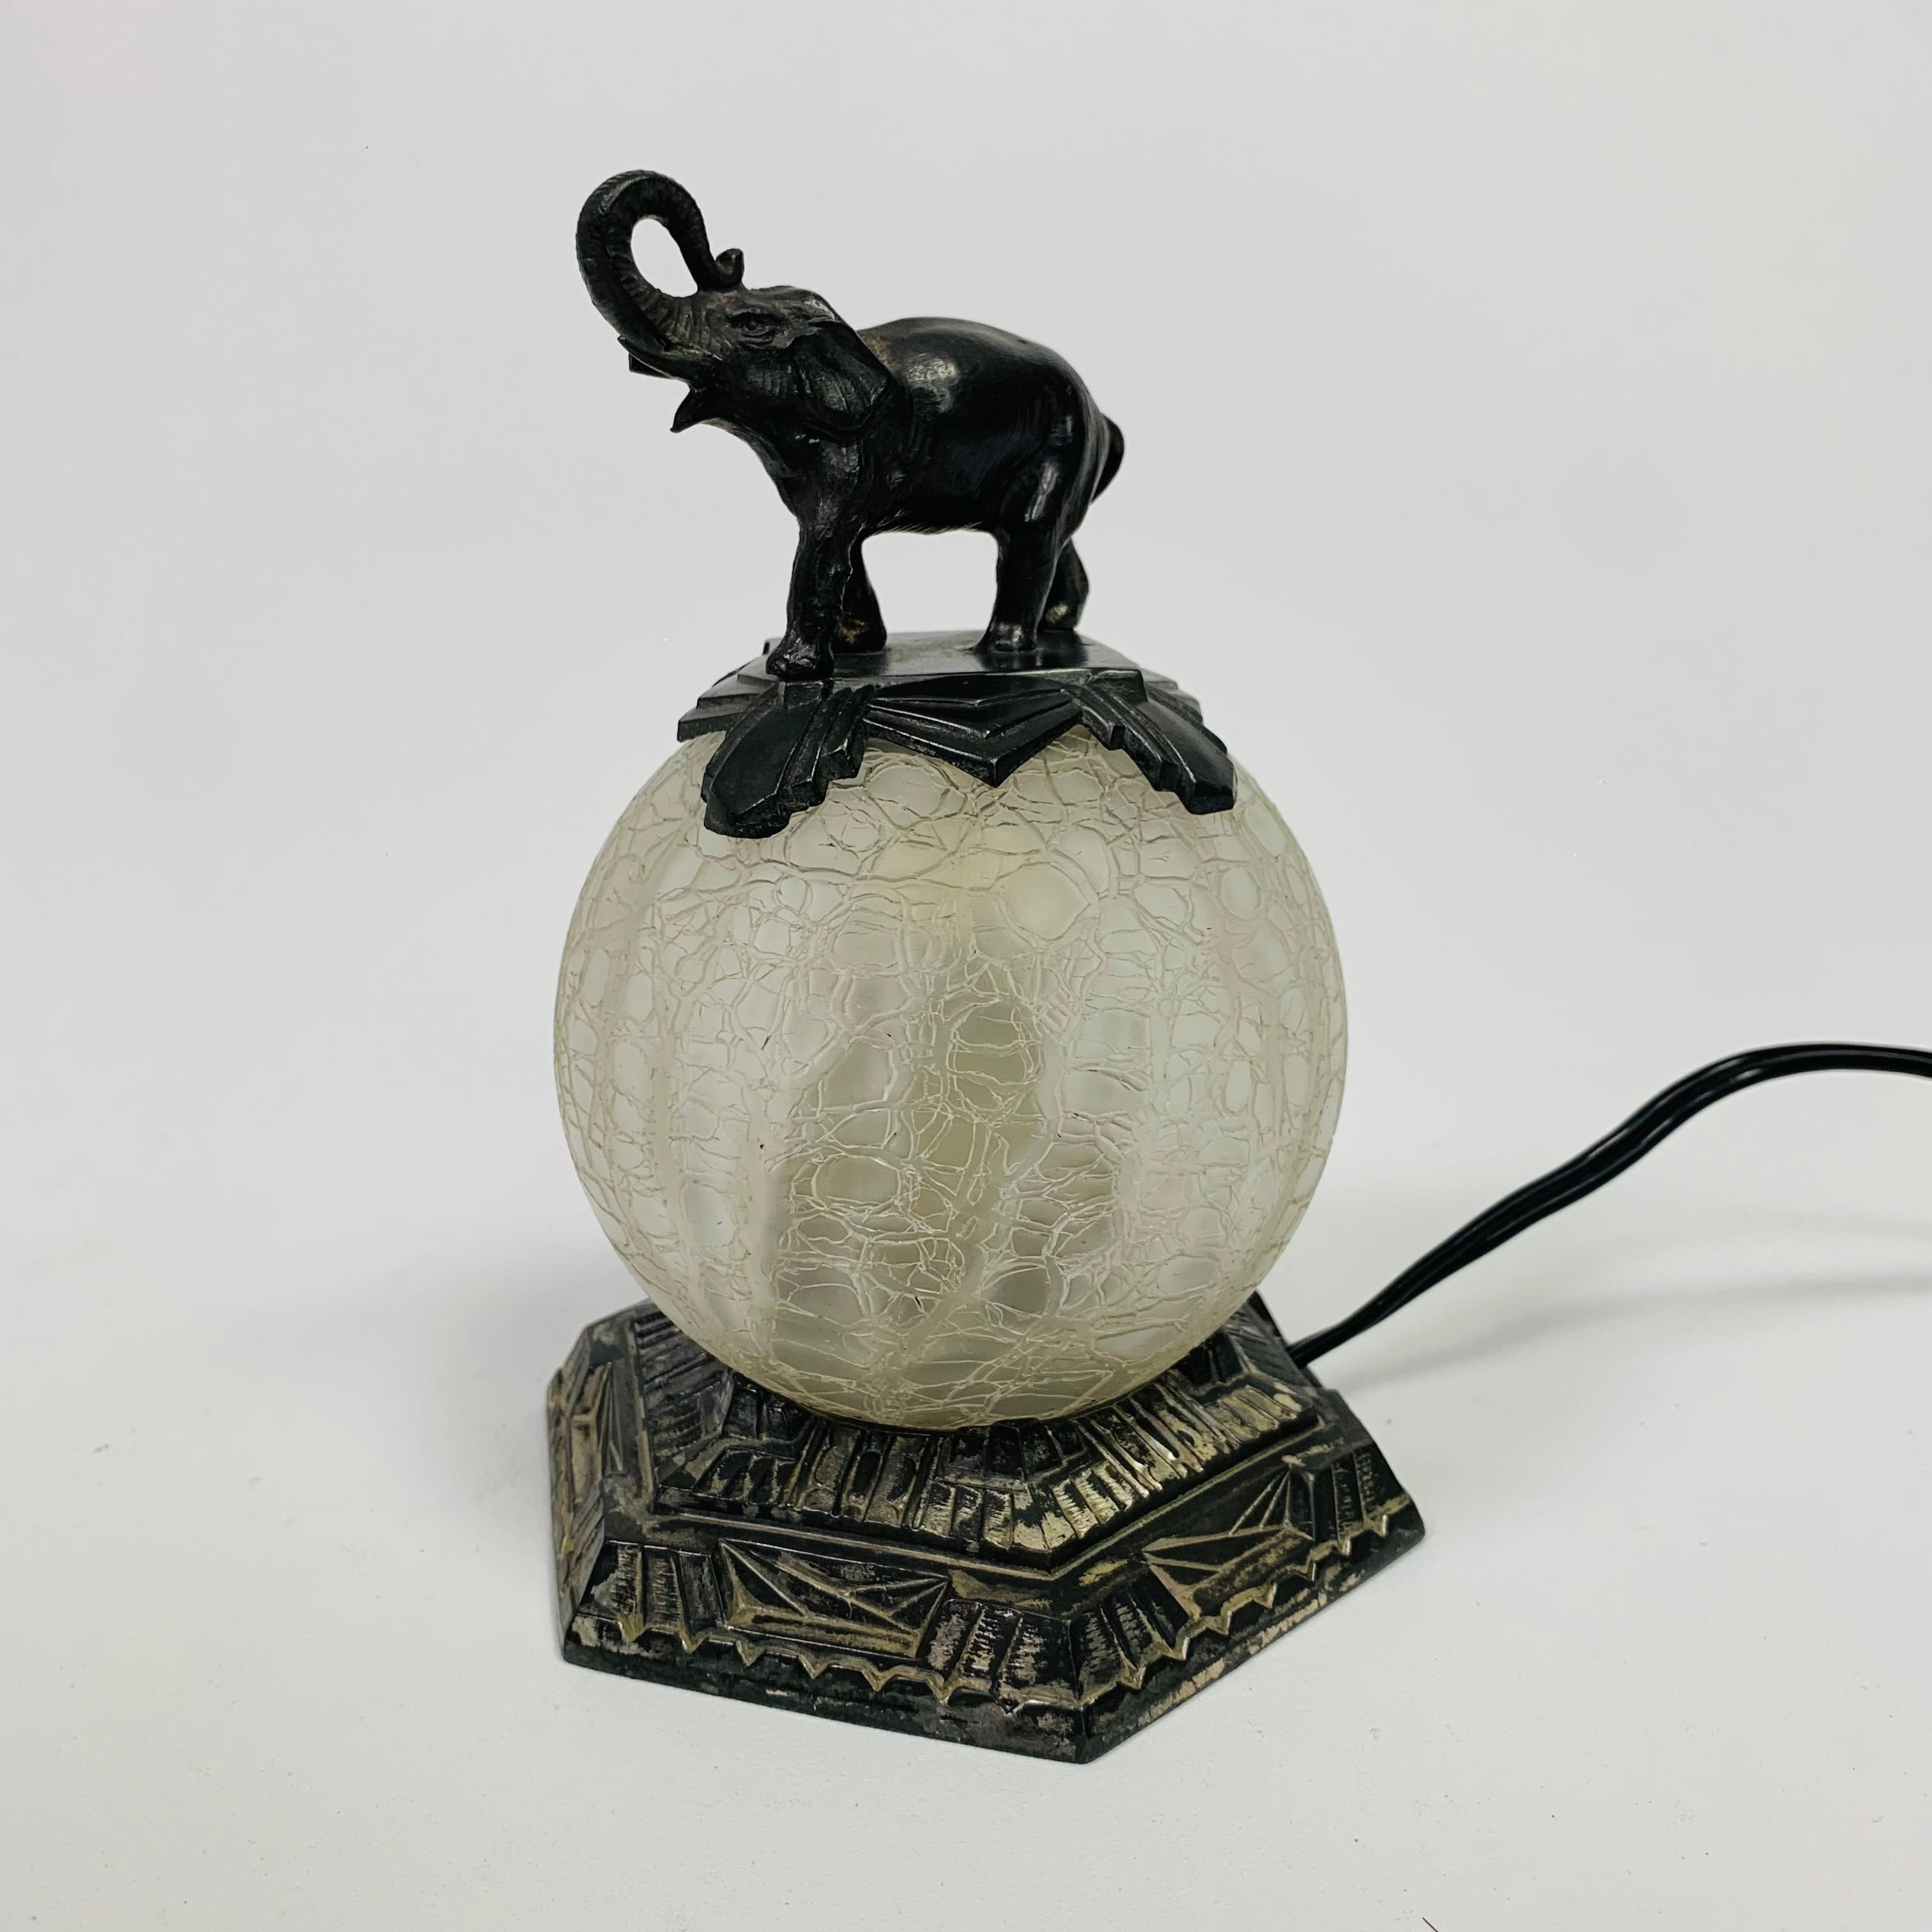 This lamp is made of a hexagonal metal
base, on which there is a glass crackled ball
(Ø: 10 cm) and at the very top is an elephant.
A light can be replaced with the 2 nuts under the
the base.

Height: 16.5 cm.
Width: 11 cm.
Depth: 12 cm.
The lamp is